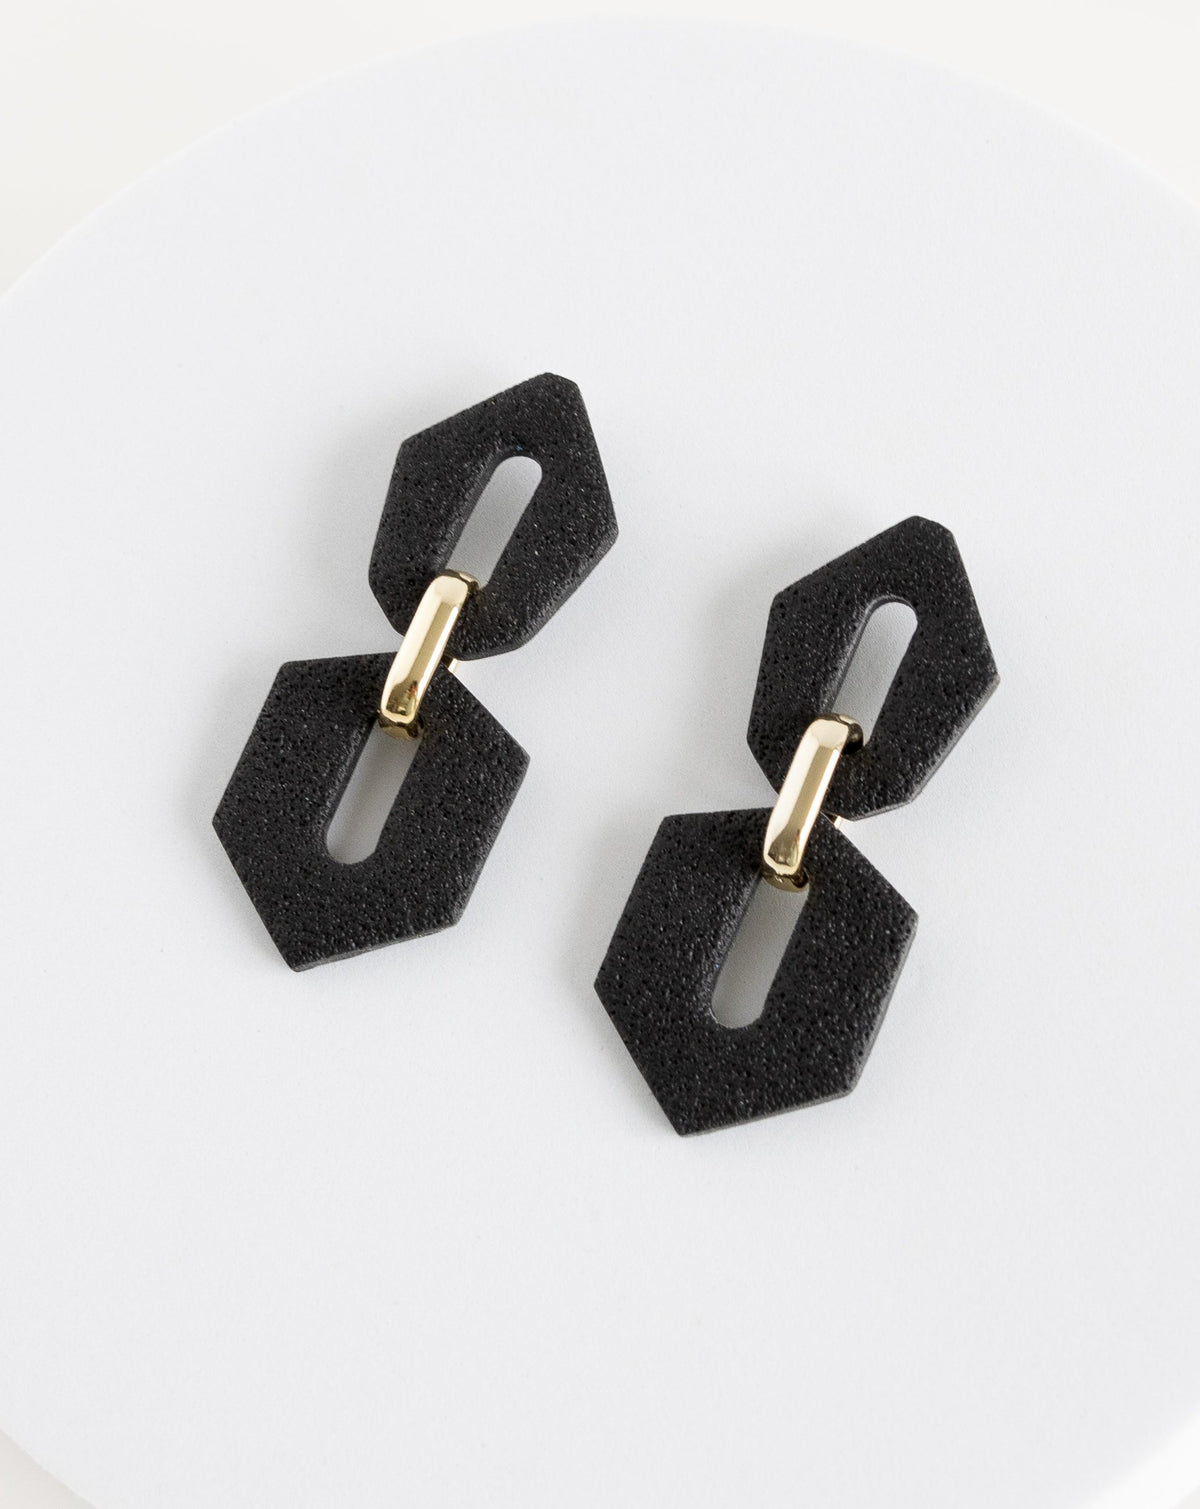 LYHO exclusive design, Shilla earrings in black, angled view.